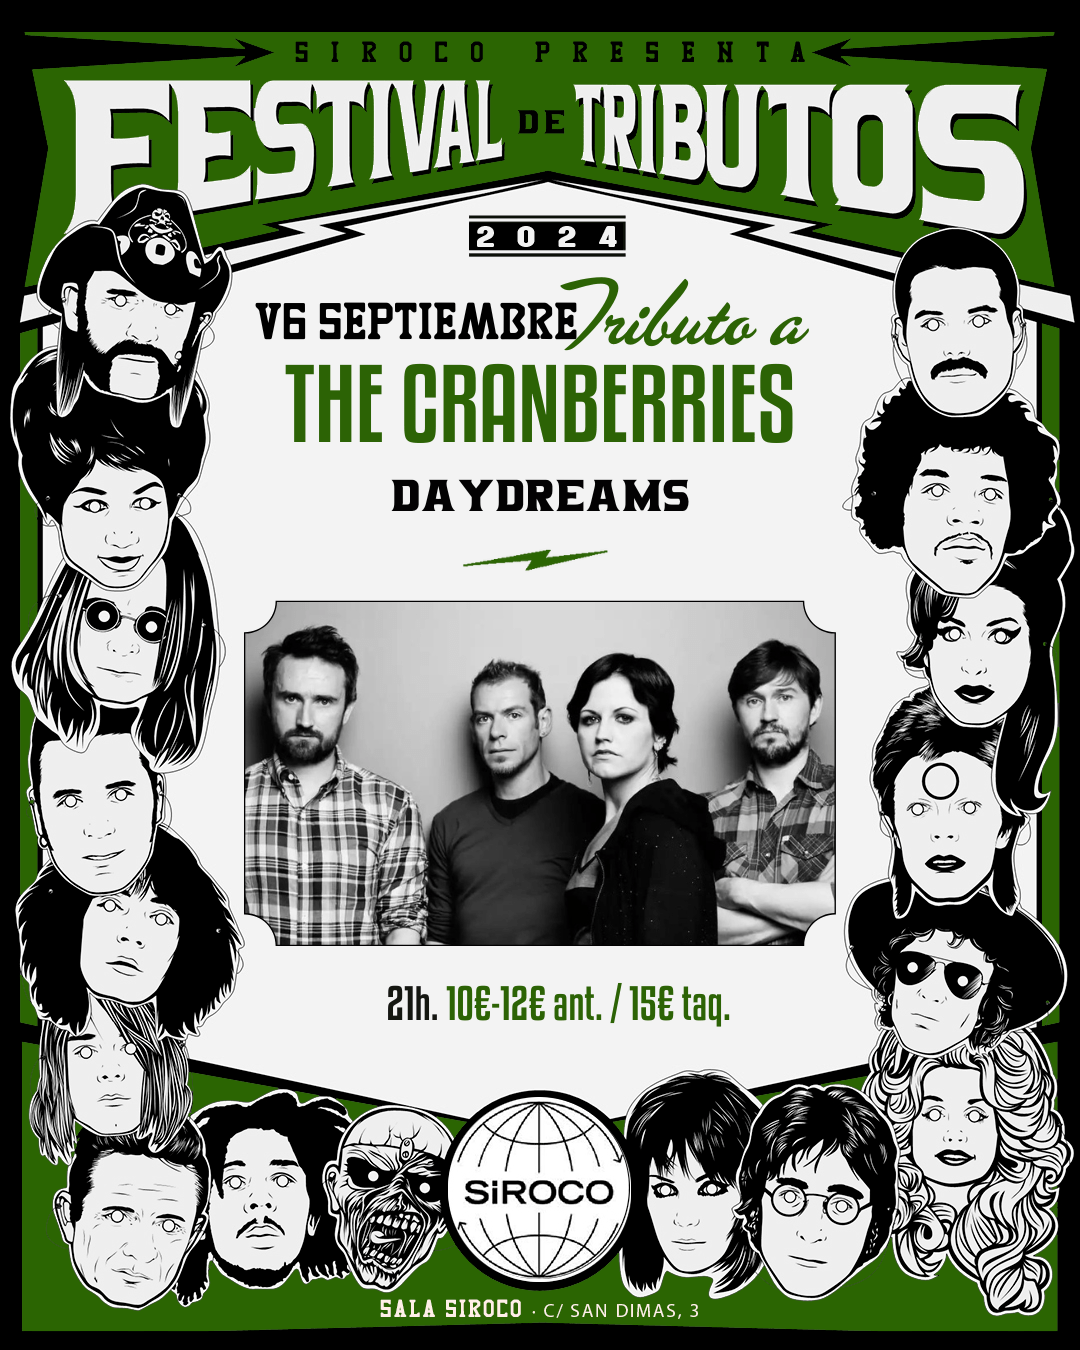 Tributo a The Cranberries: Daydreams